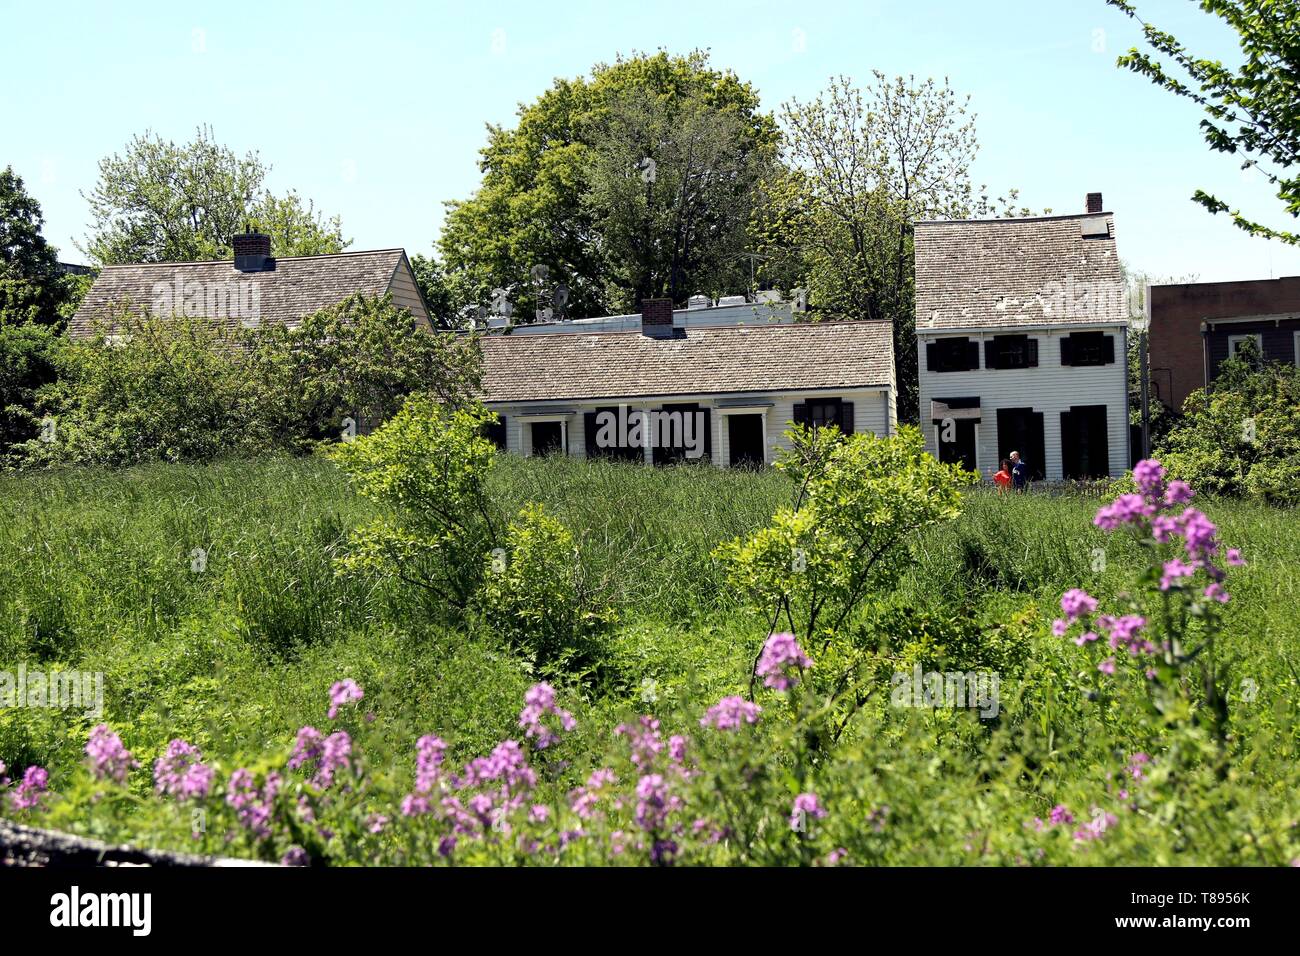 May 11, 2019 - New York City, New York, US - After the abolition of slavery in New York, freed African Americans bought plots of land at a then-remote area as a way to secure voting rights and generational wealth in a community that became known as Weeksville in Crown Heights, Brooklyn. In 1838, it was the largest free black communities in the state. Over the decades, European immigrants took over the community and most of the homes were razed. Now, the cultural institution faces closure and has turned to crowdfunding for its survival. Pictured are surving homes. (Credit Image: © G. Ronald Lop Stock Photo